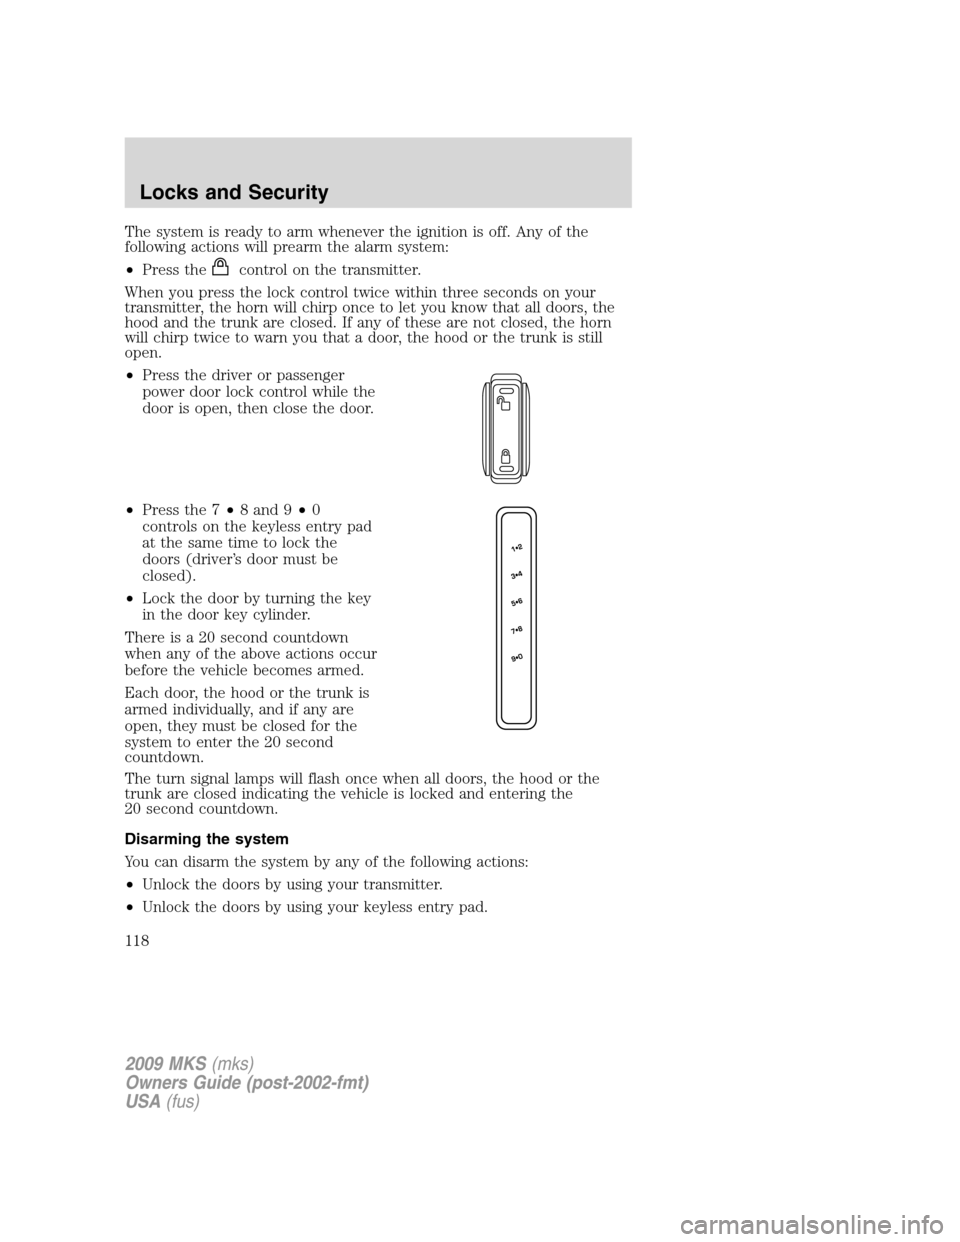 LINCOLN MKS 2009  Owners Manual The system is ready to arm whenever the ignition is off. Any of the
following actions will prearm the alarm system:
•Press the
control on the transmitter.
When you press the lock control twice withi